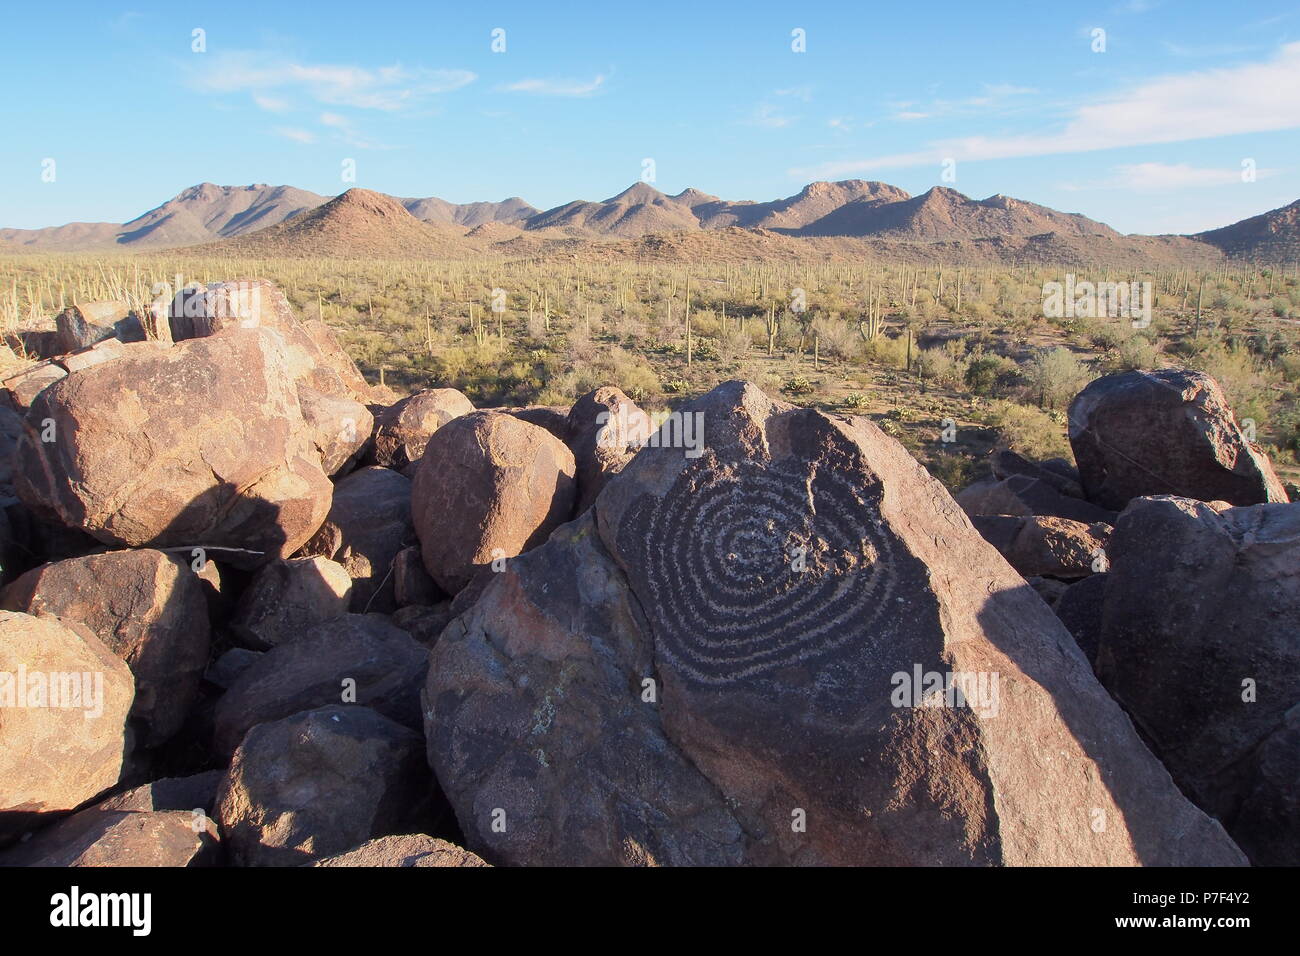 Spiral Hohokam petroglyph on Signal hill with Saguaros and mountains in the background in Saguaro National Park near Tucson, Arizona, United States. Stock Photo